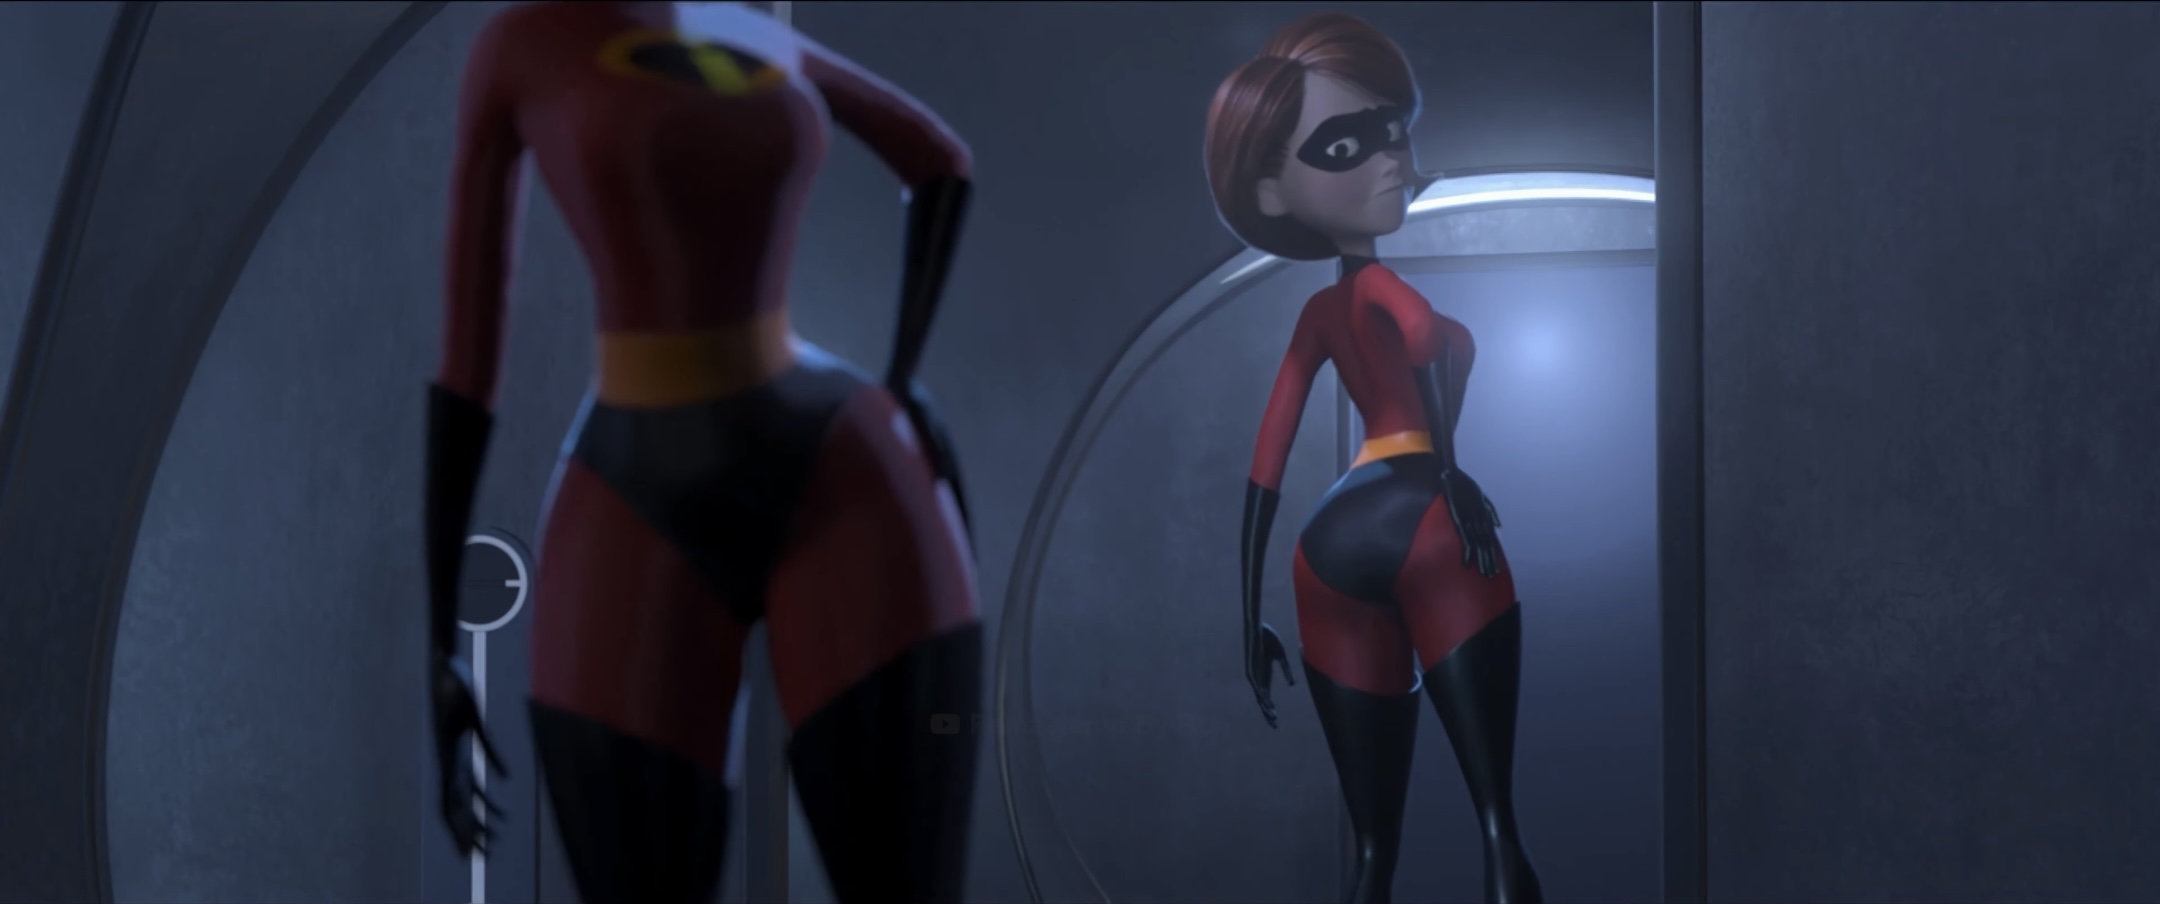 0. For me, currently it's Mrs. Incredible. 